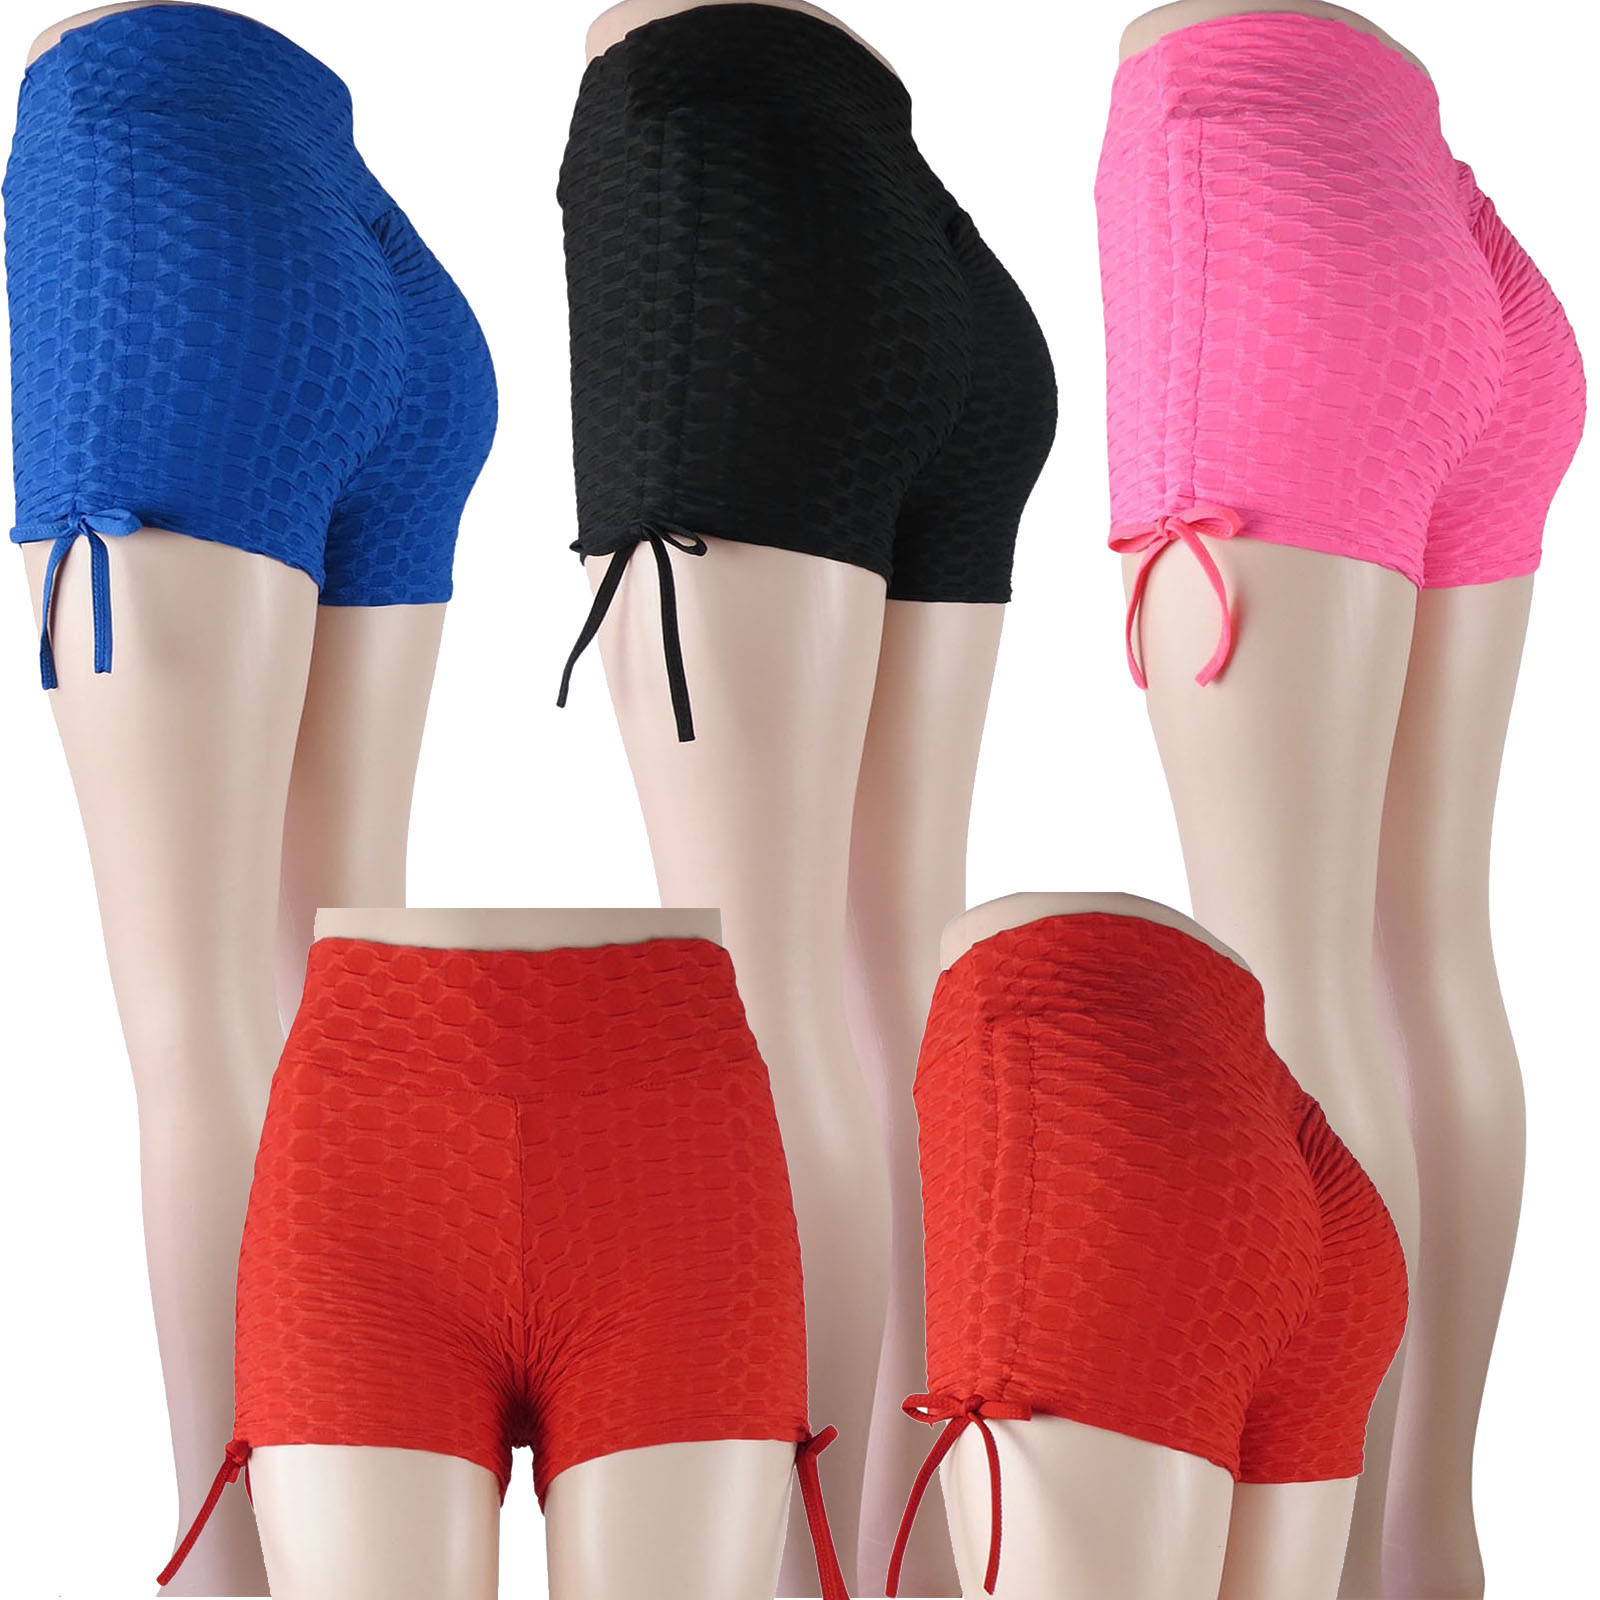 Wholesale Leggings Manufacturer and Distributor in USA, Canada